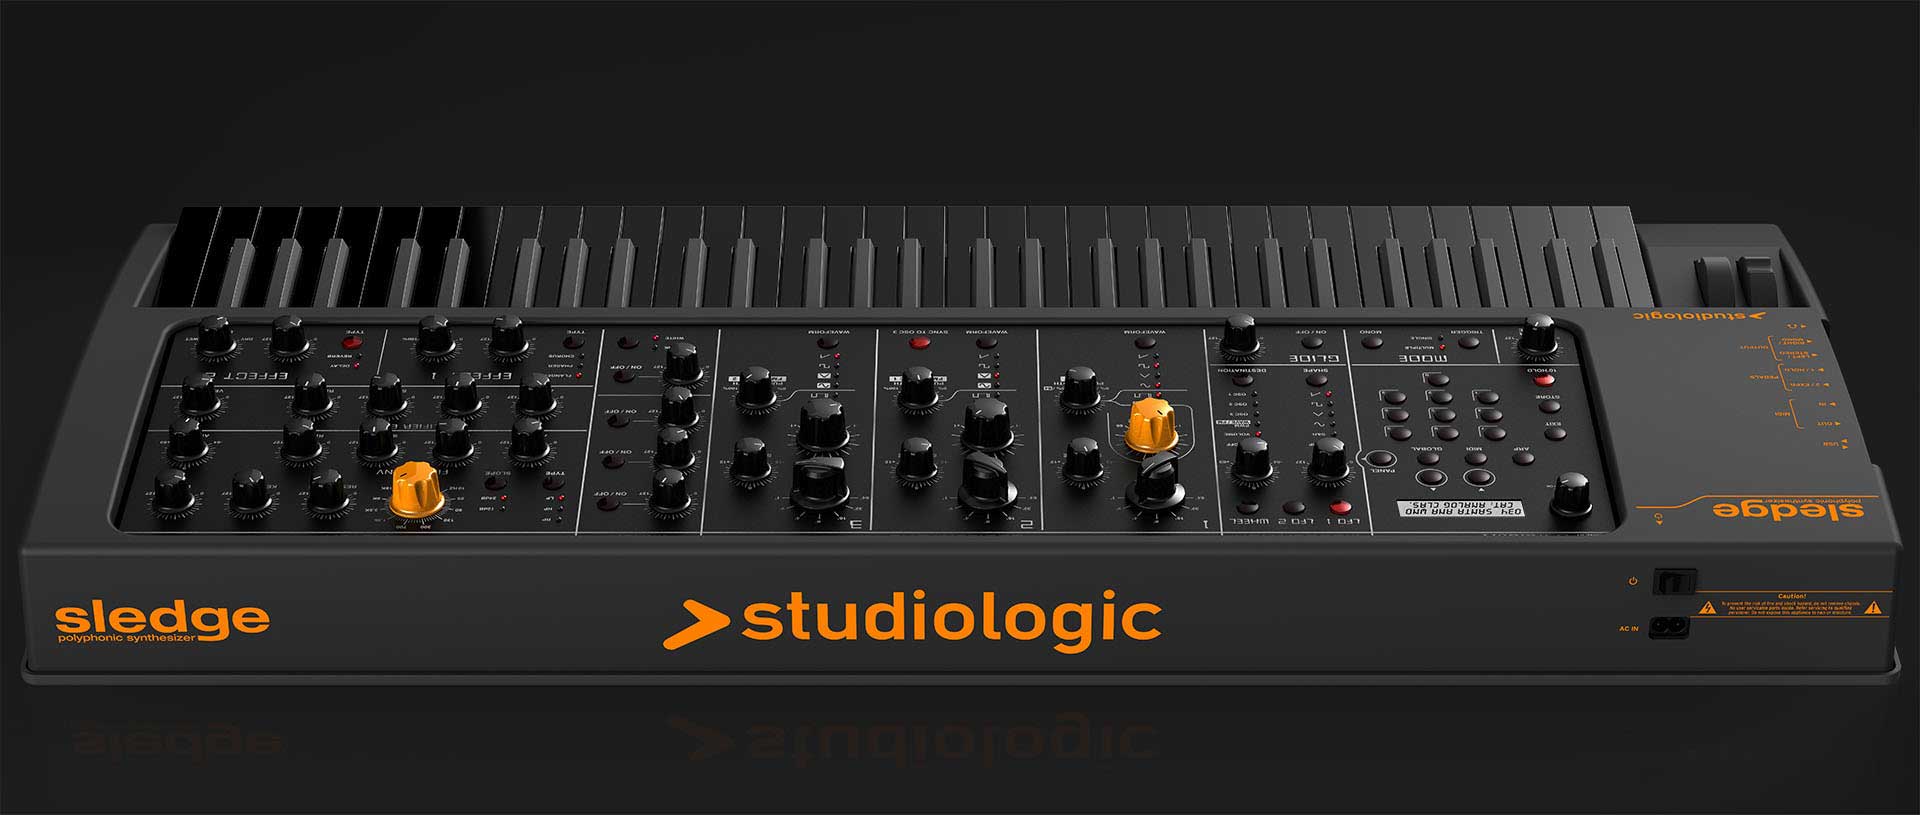 Studiologic-Fatar Lightweight Controller With Real Hammer Action Item ID: SLEDGE-BLACK